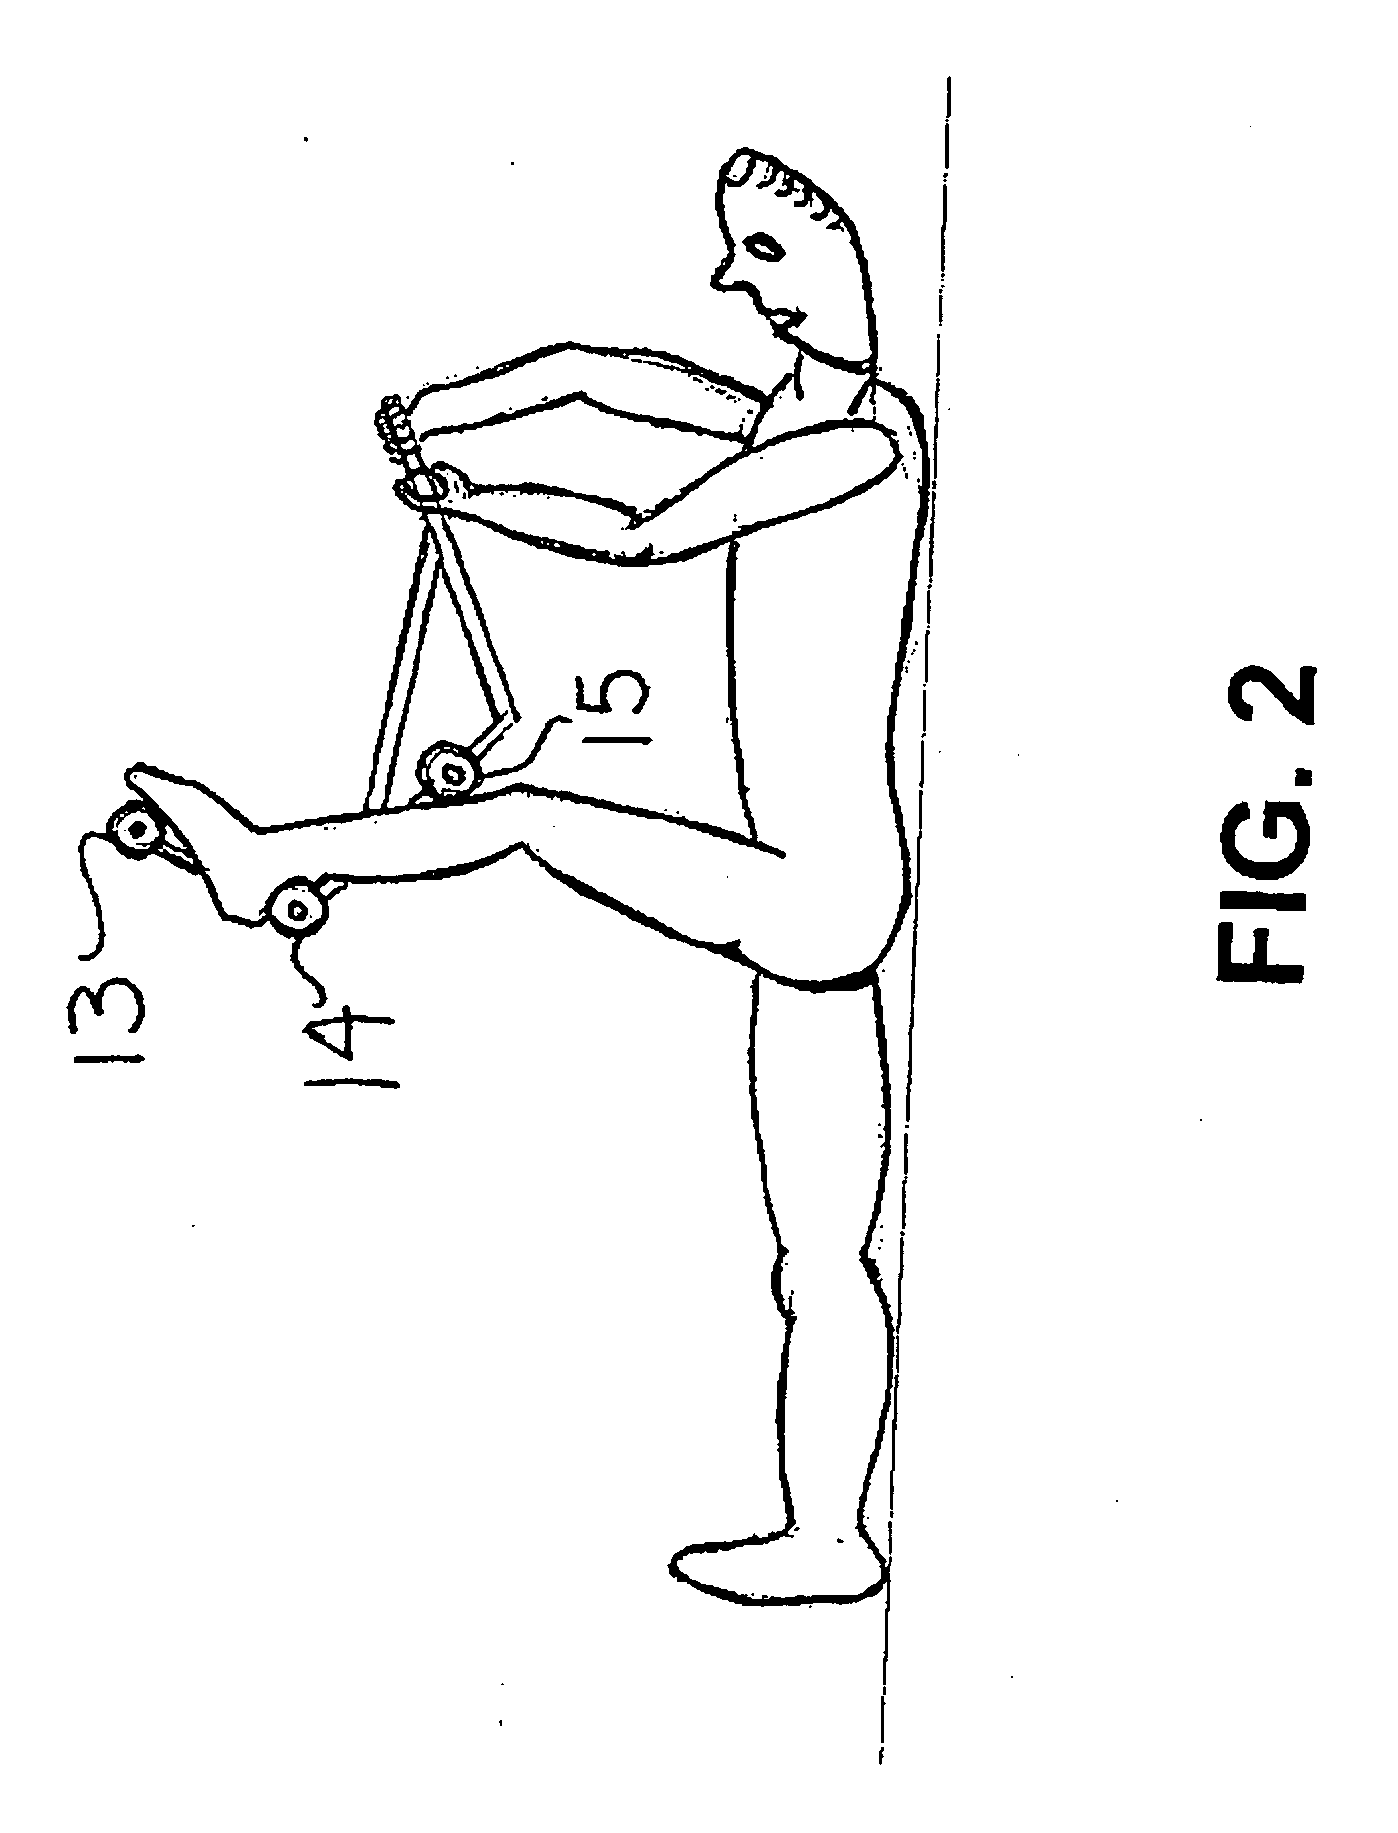 Apparatus for stretching hamstrings